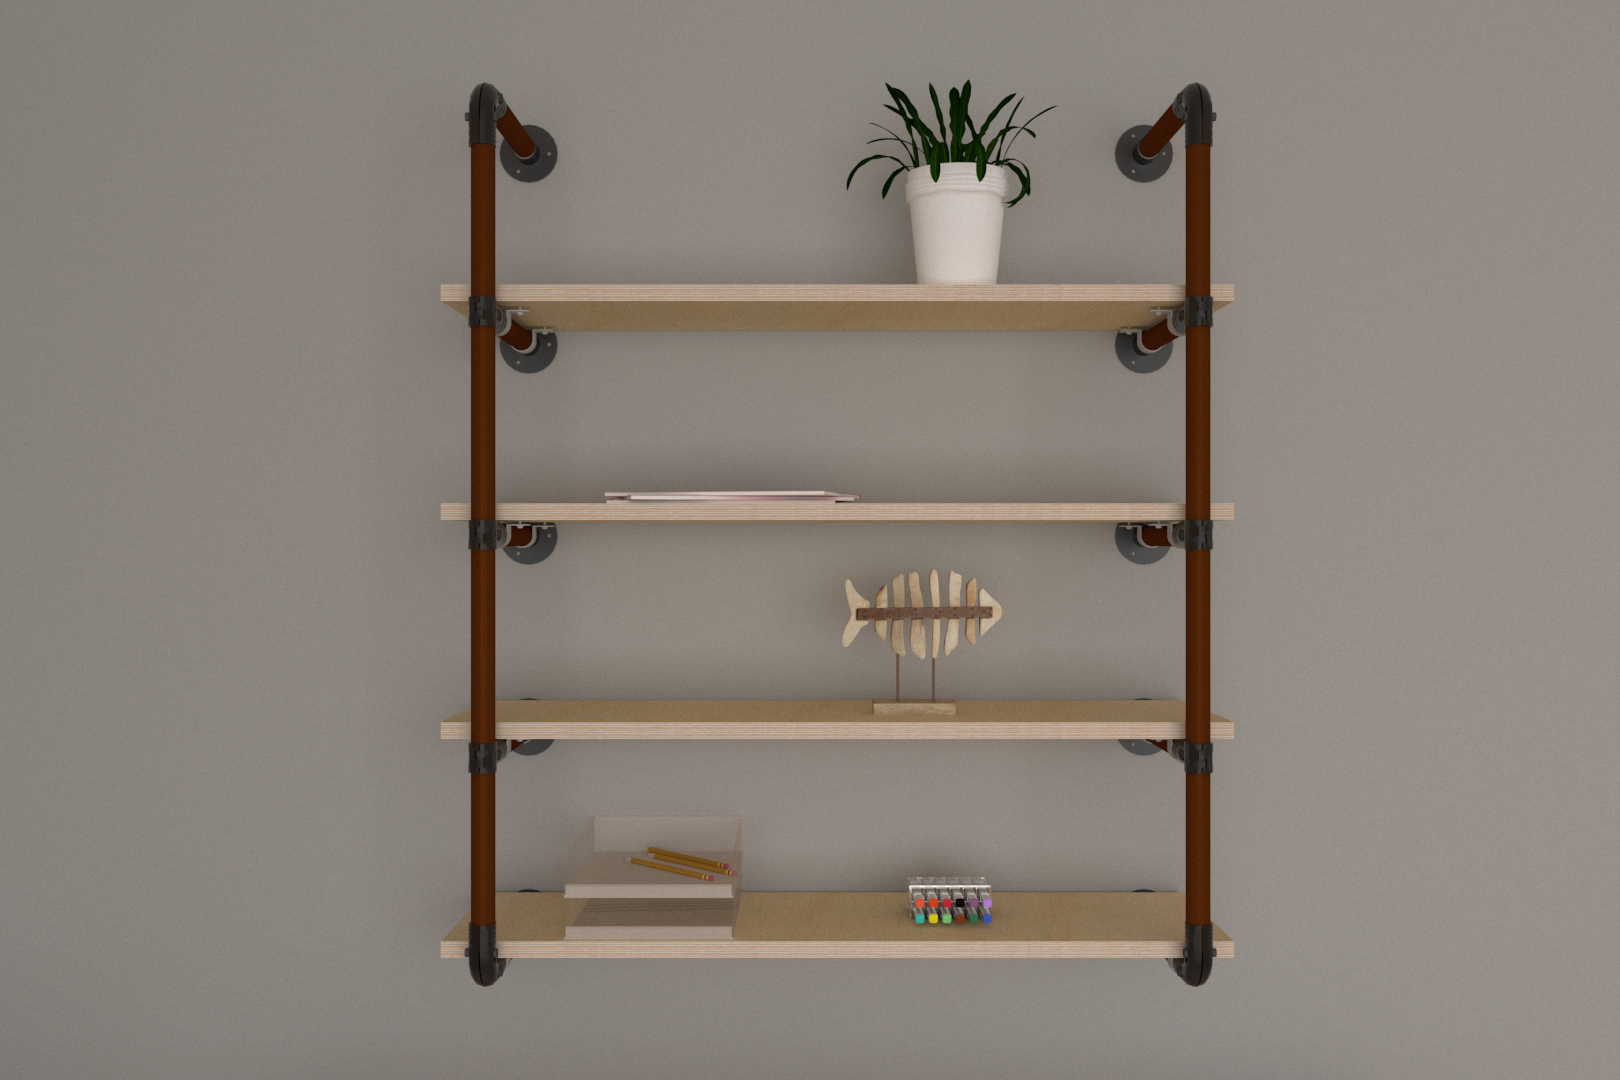 DIY wall shelves with pipes and fittings